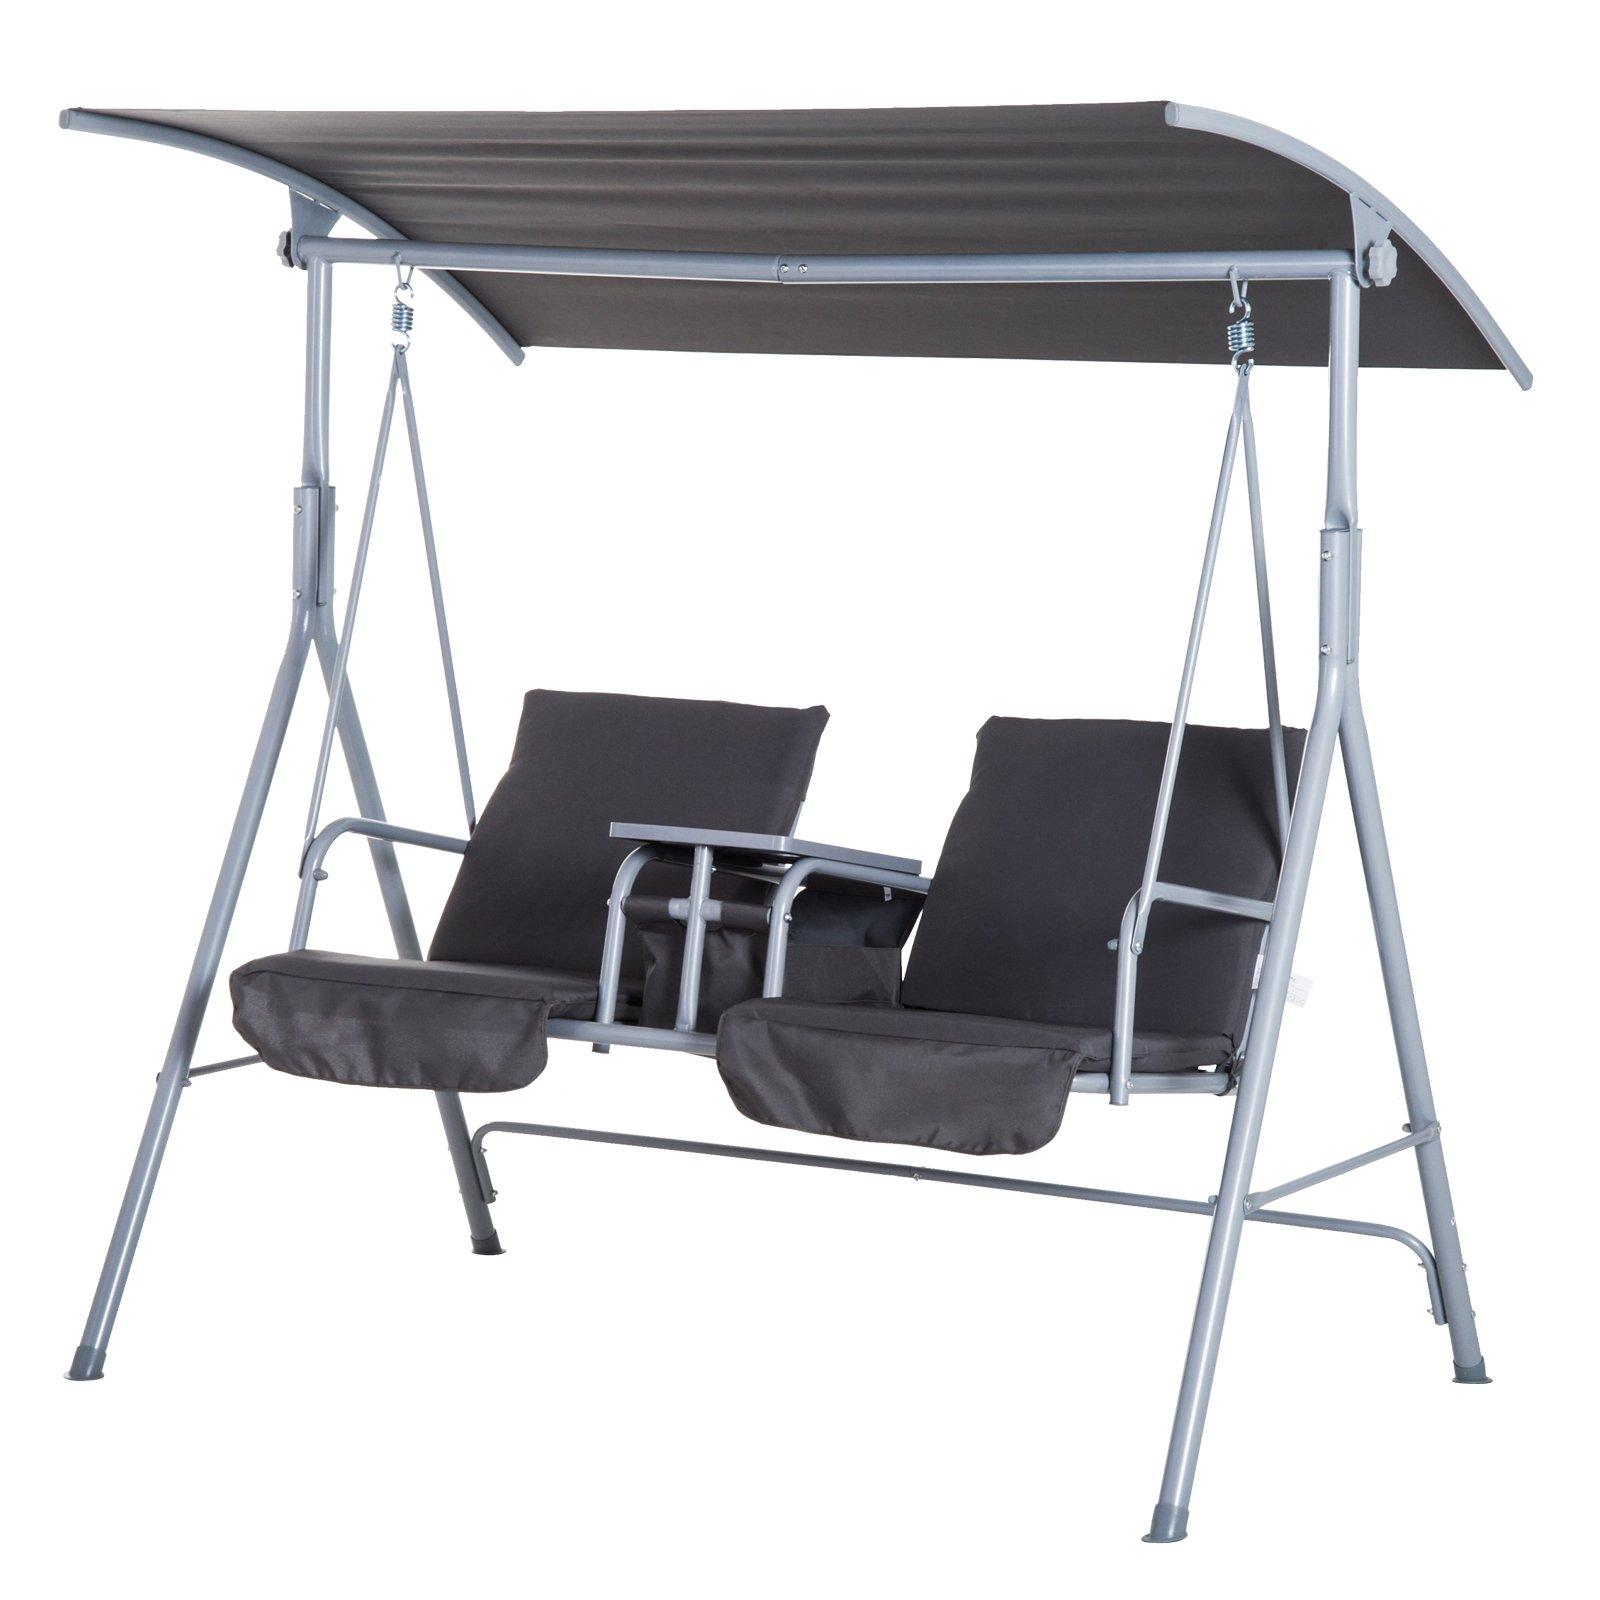 2 Person CovePatio Swing with Pivot Table and Storage Console